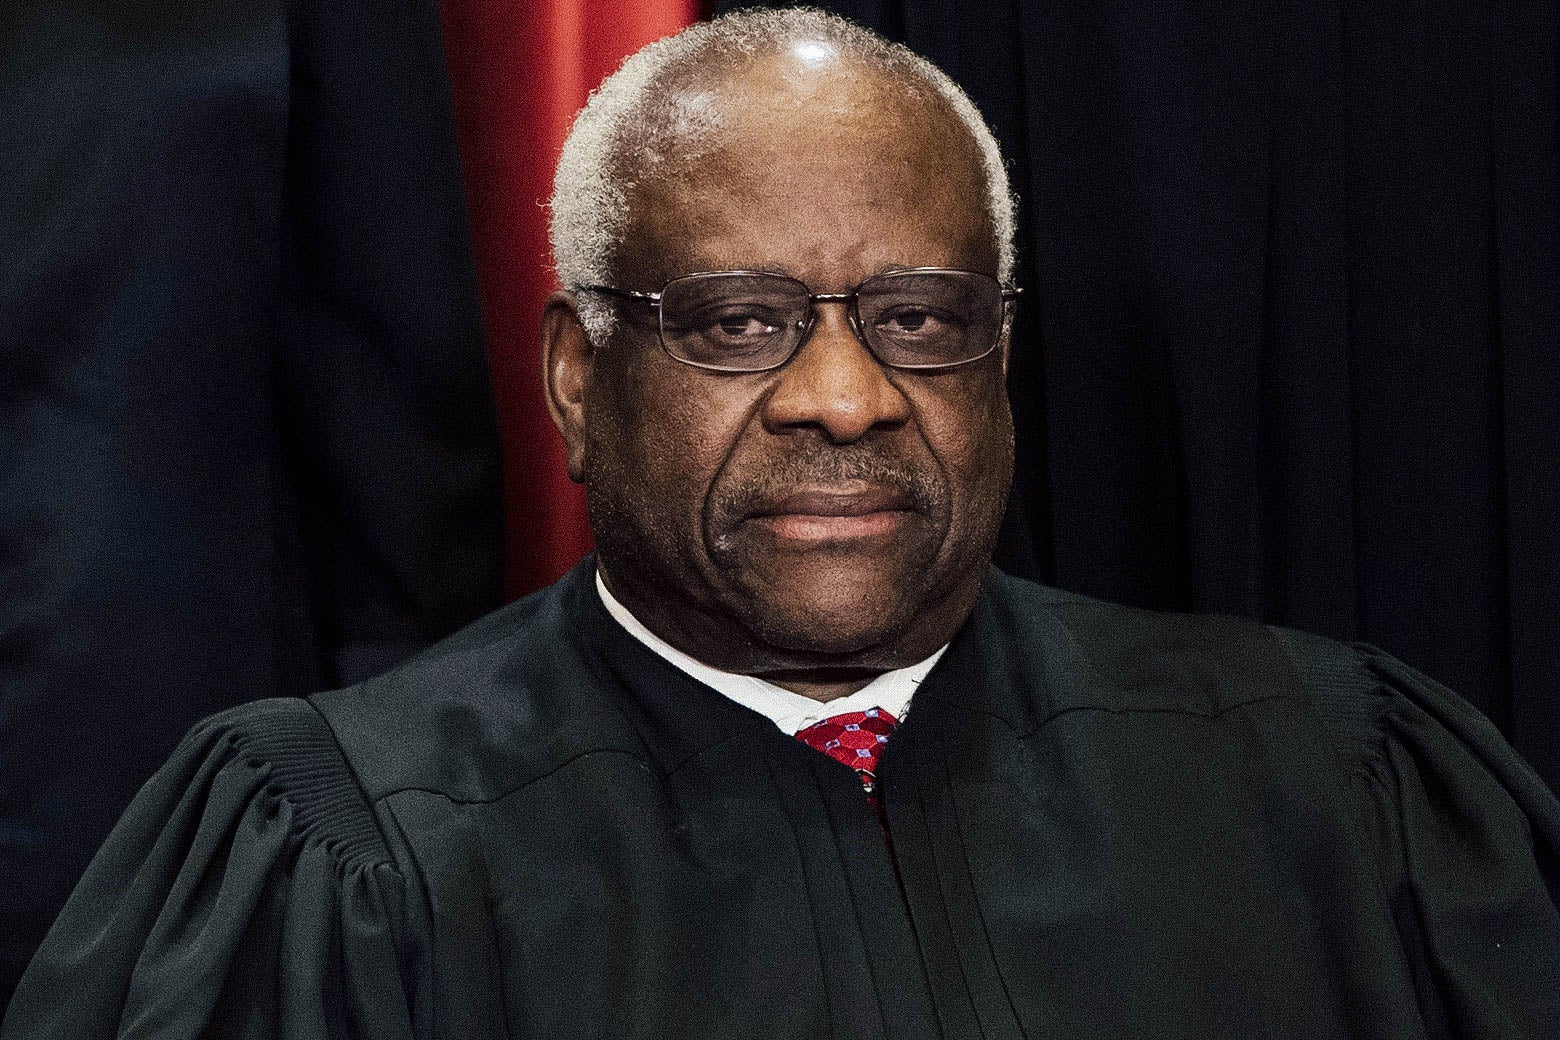 Justice Clarence Thomas seated, in his robes.